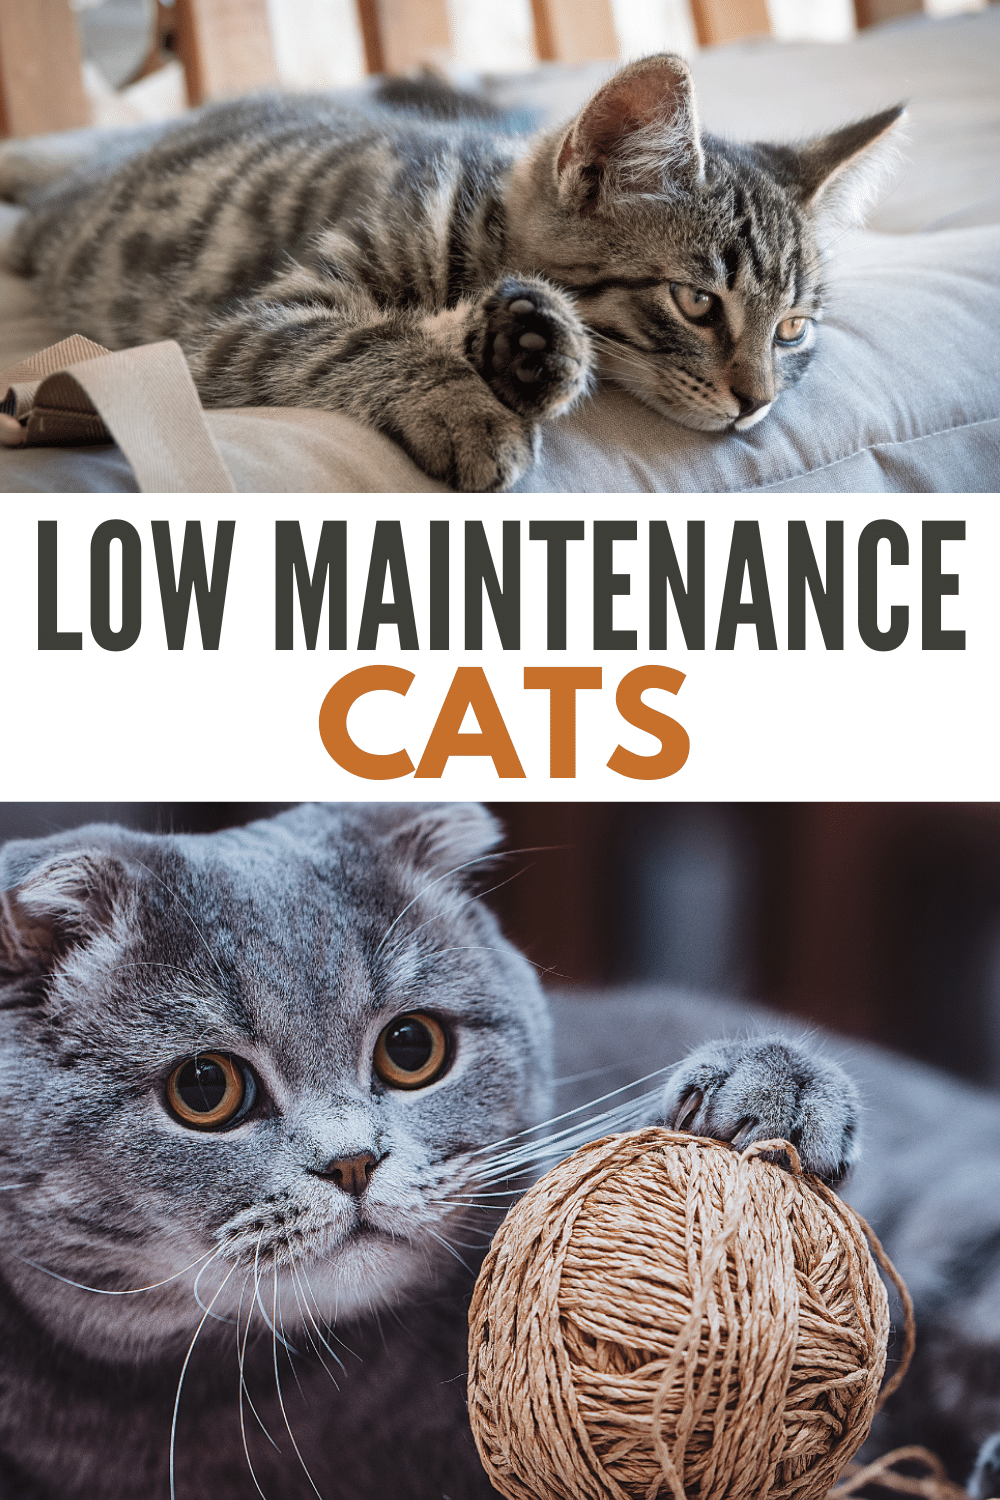 2 images of cats with title text in between reading Low Maintenance Cats.